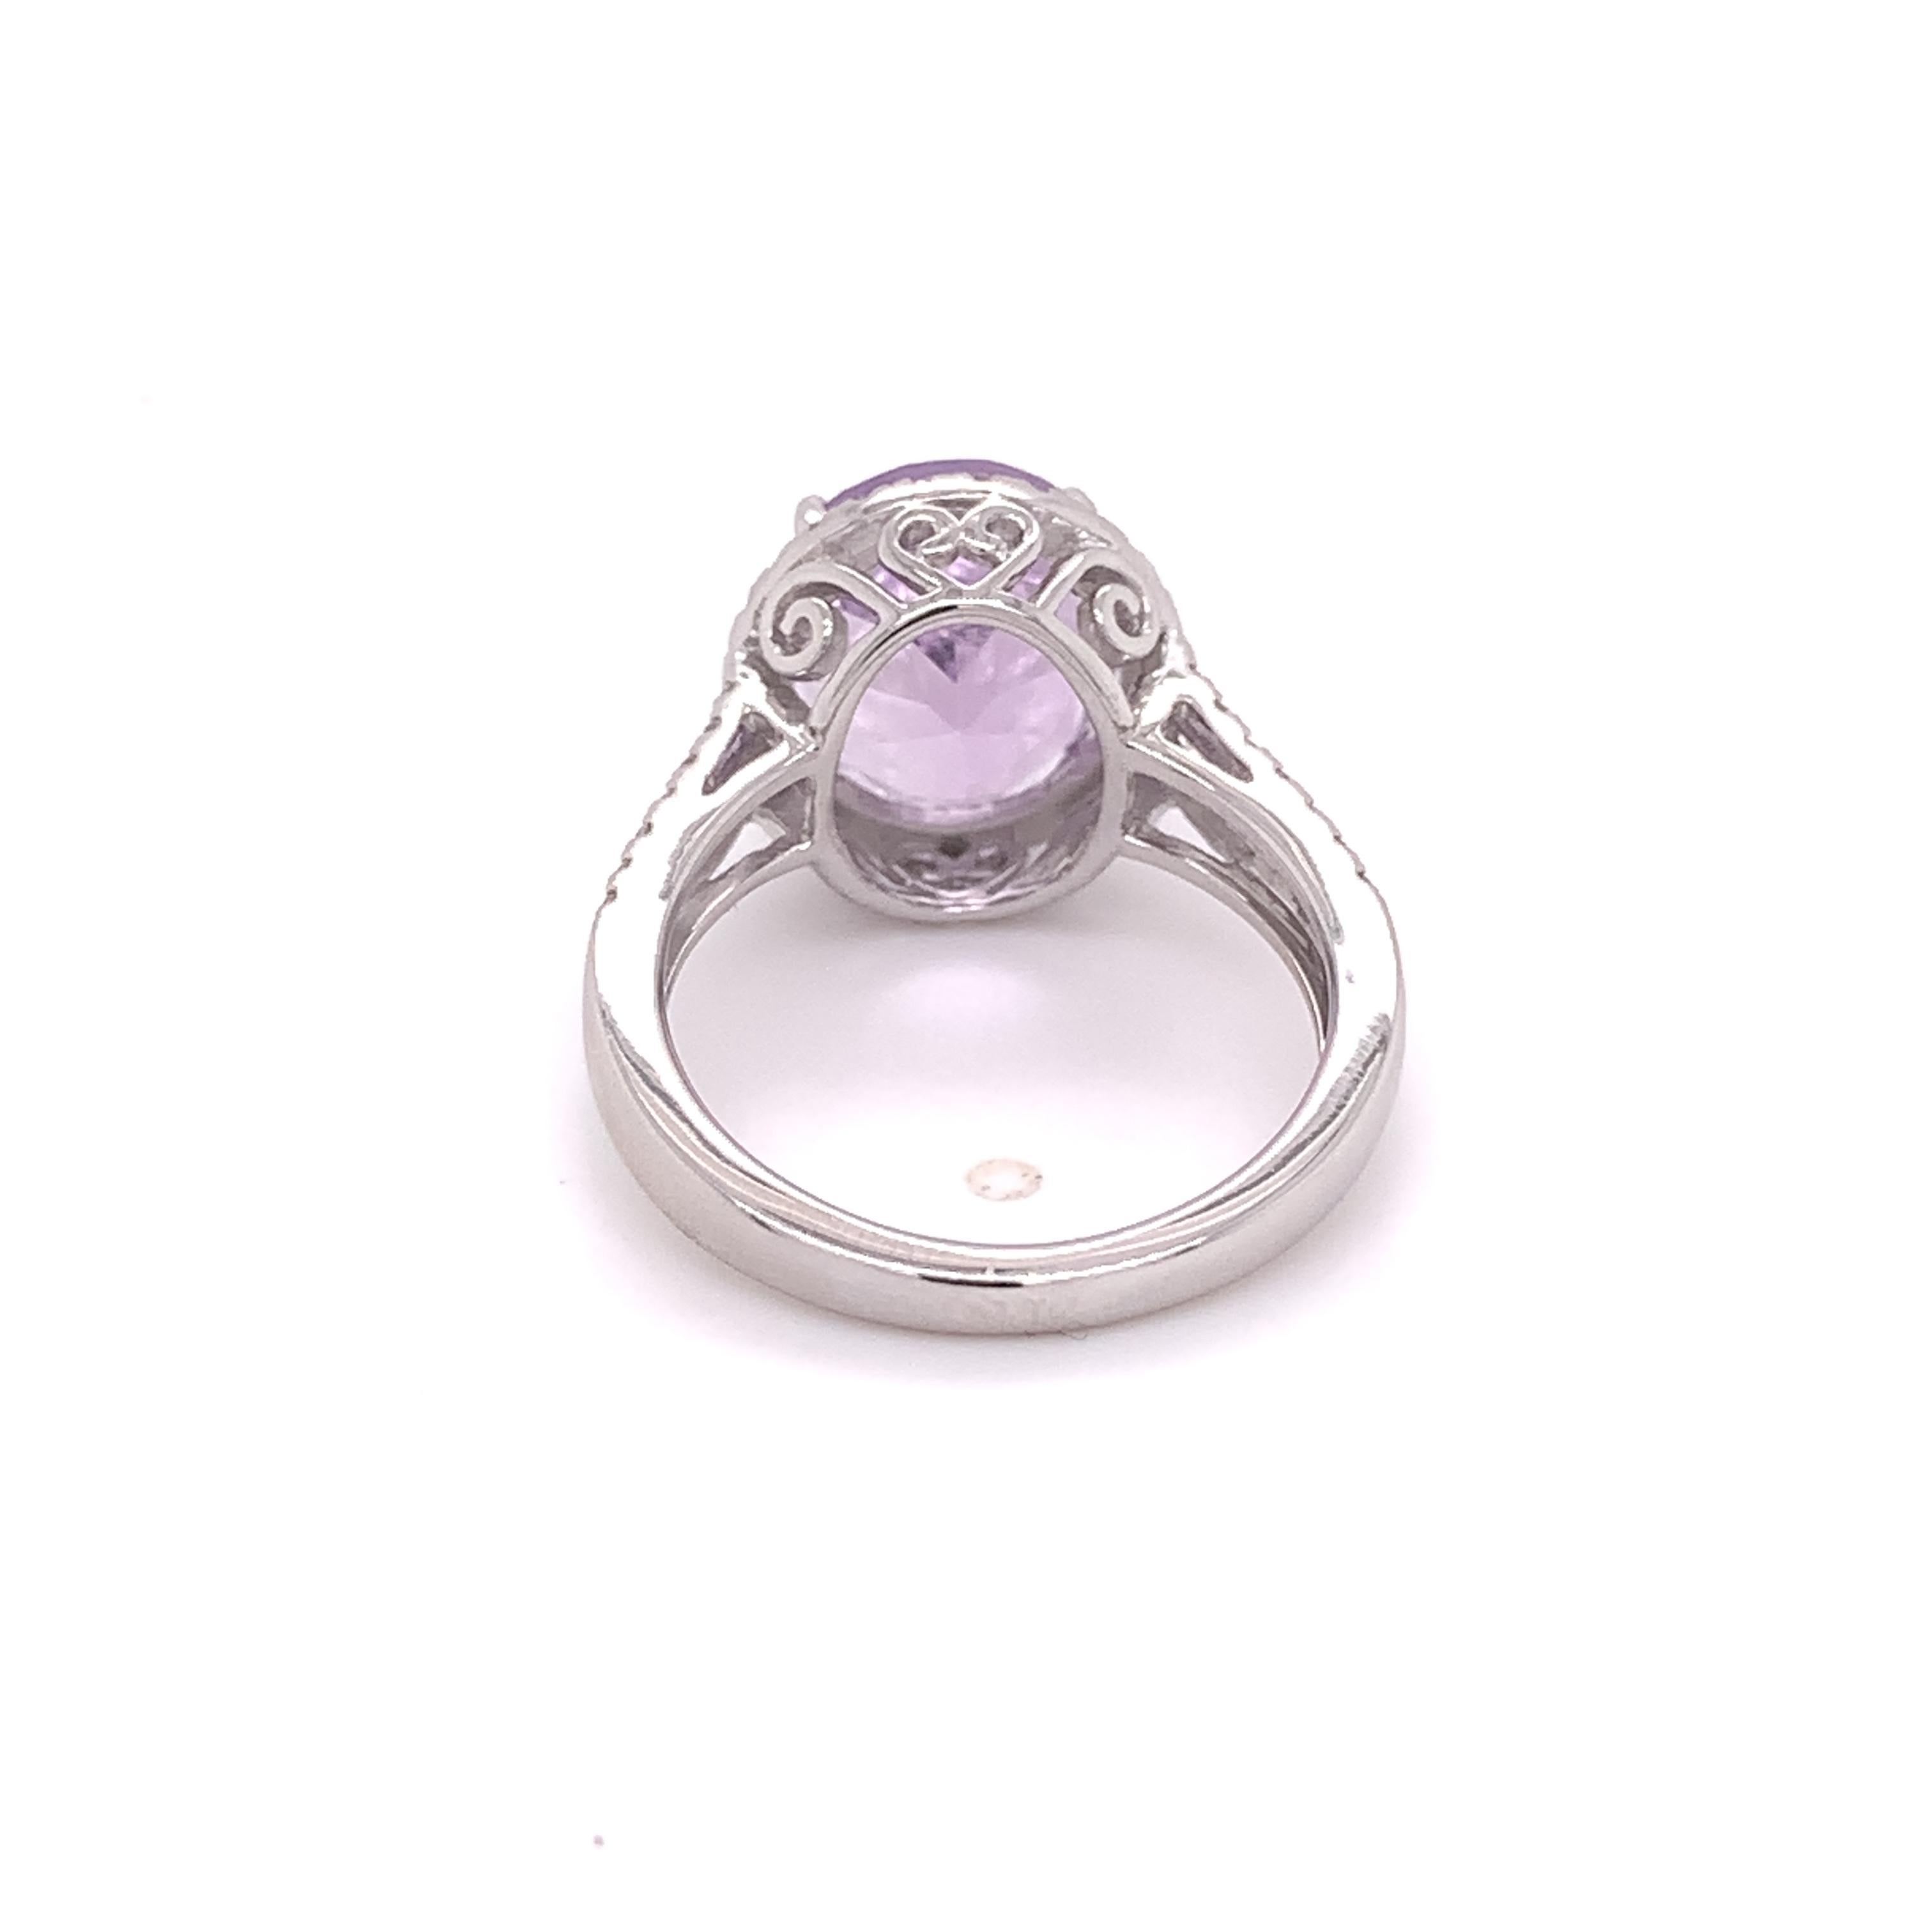 This ring features a lovely natural 4.50 carat Amethyst stone measuring 2.00 x 10.00 x 6.50mm. This ring has a shimmering halo and a split shank set with 54 natural round brilliant diamonds totaling approximately 0.54 carats, H-I color, and I1